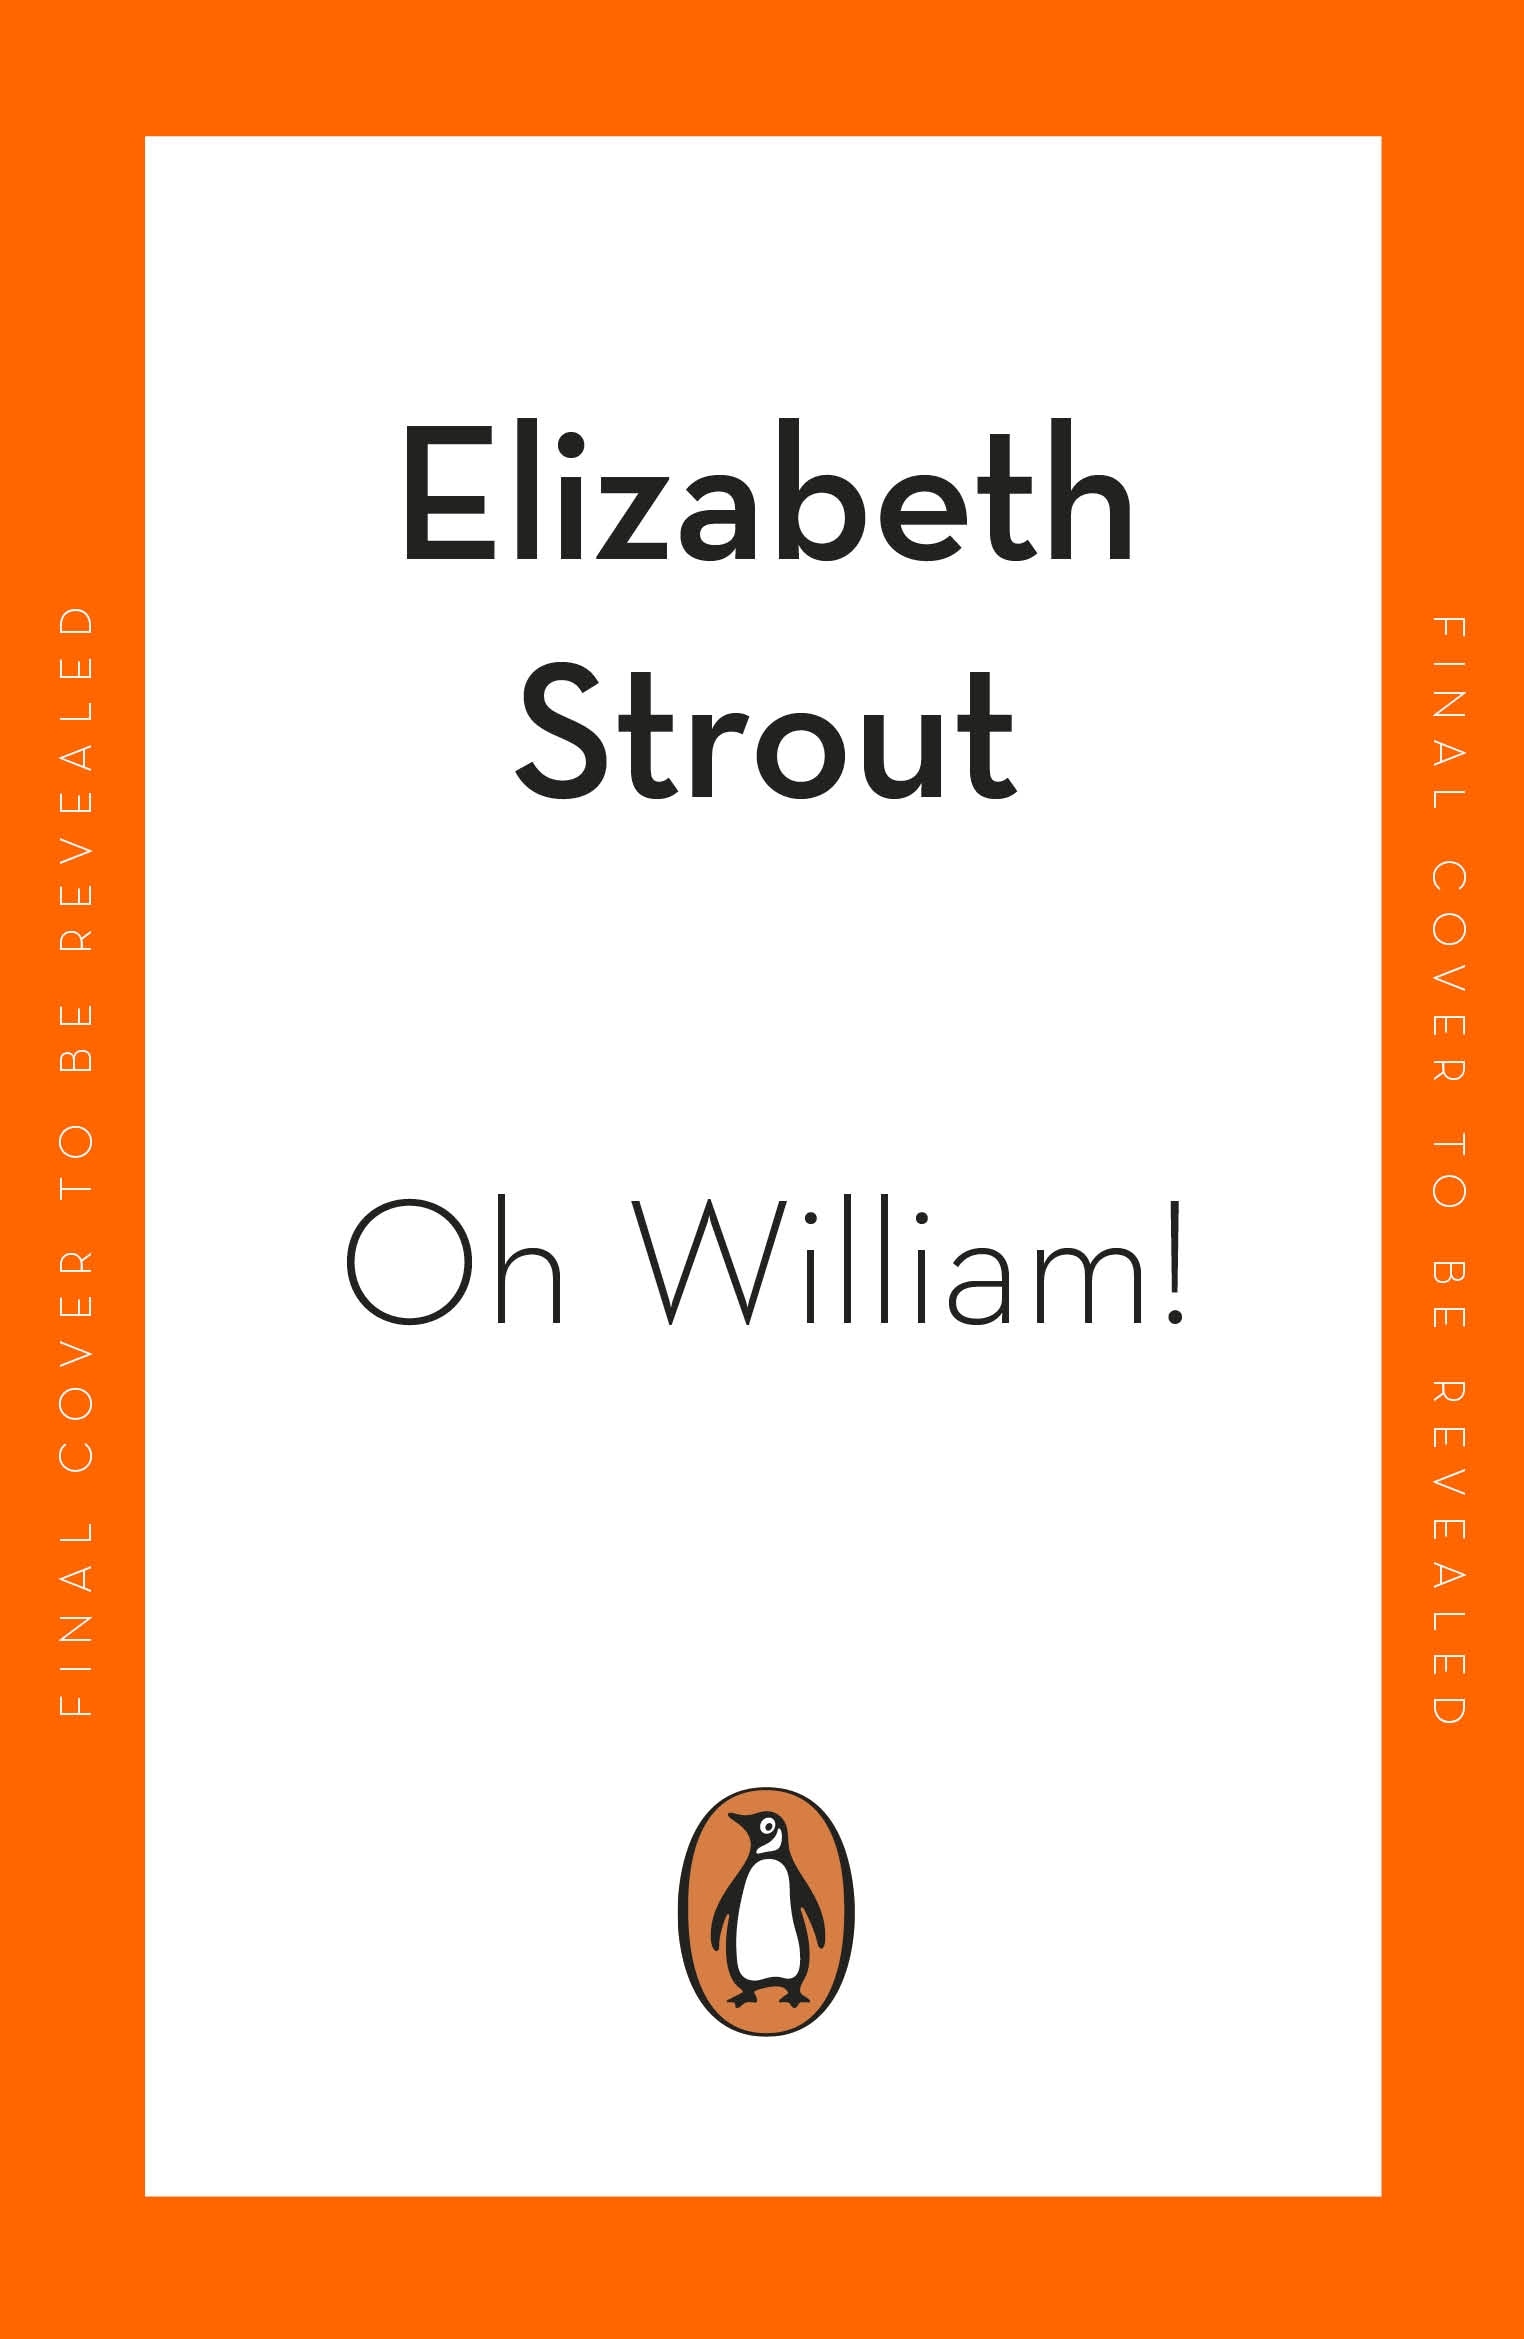 Book “Oh William!” by Elizabeth Strout — October 6, 2022